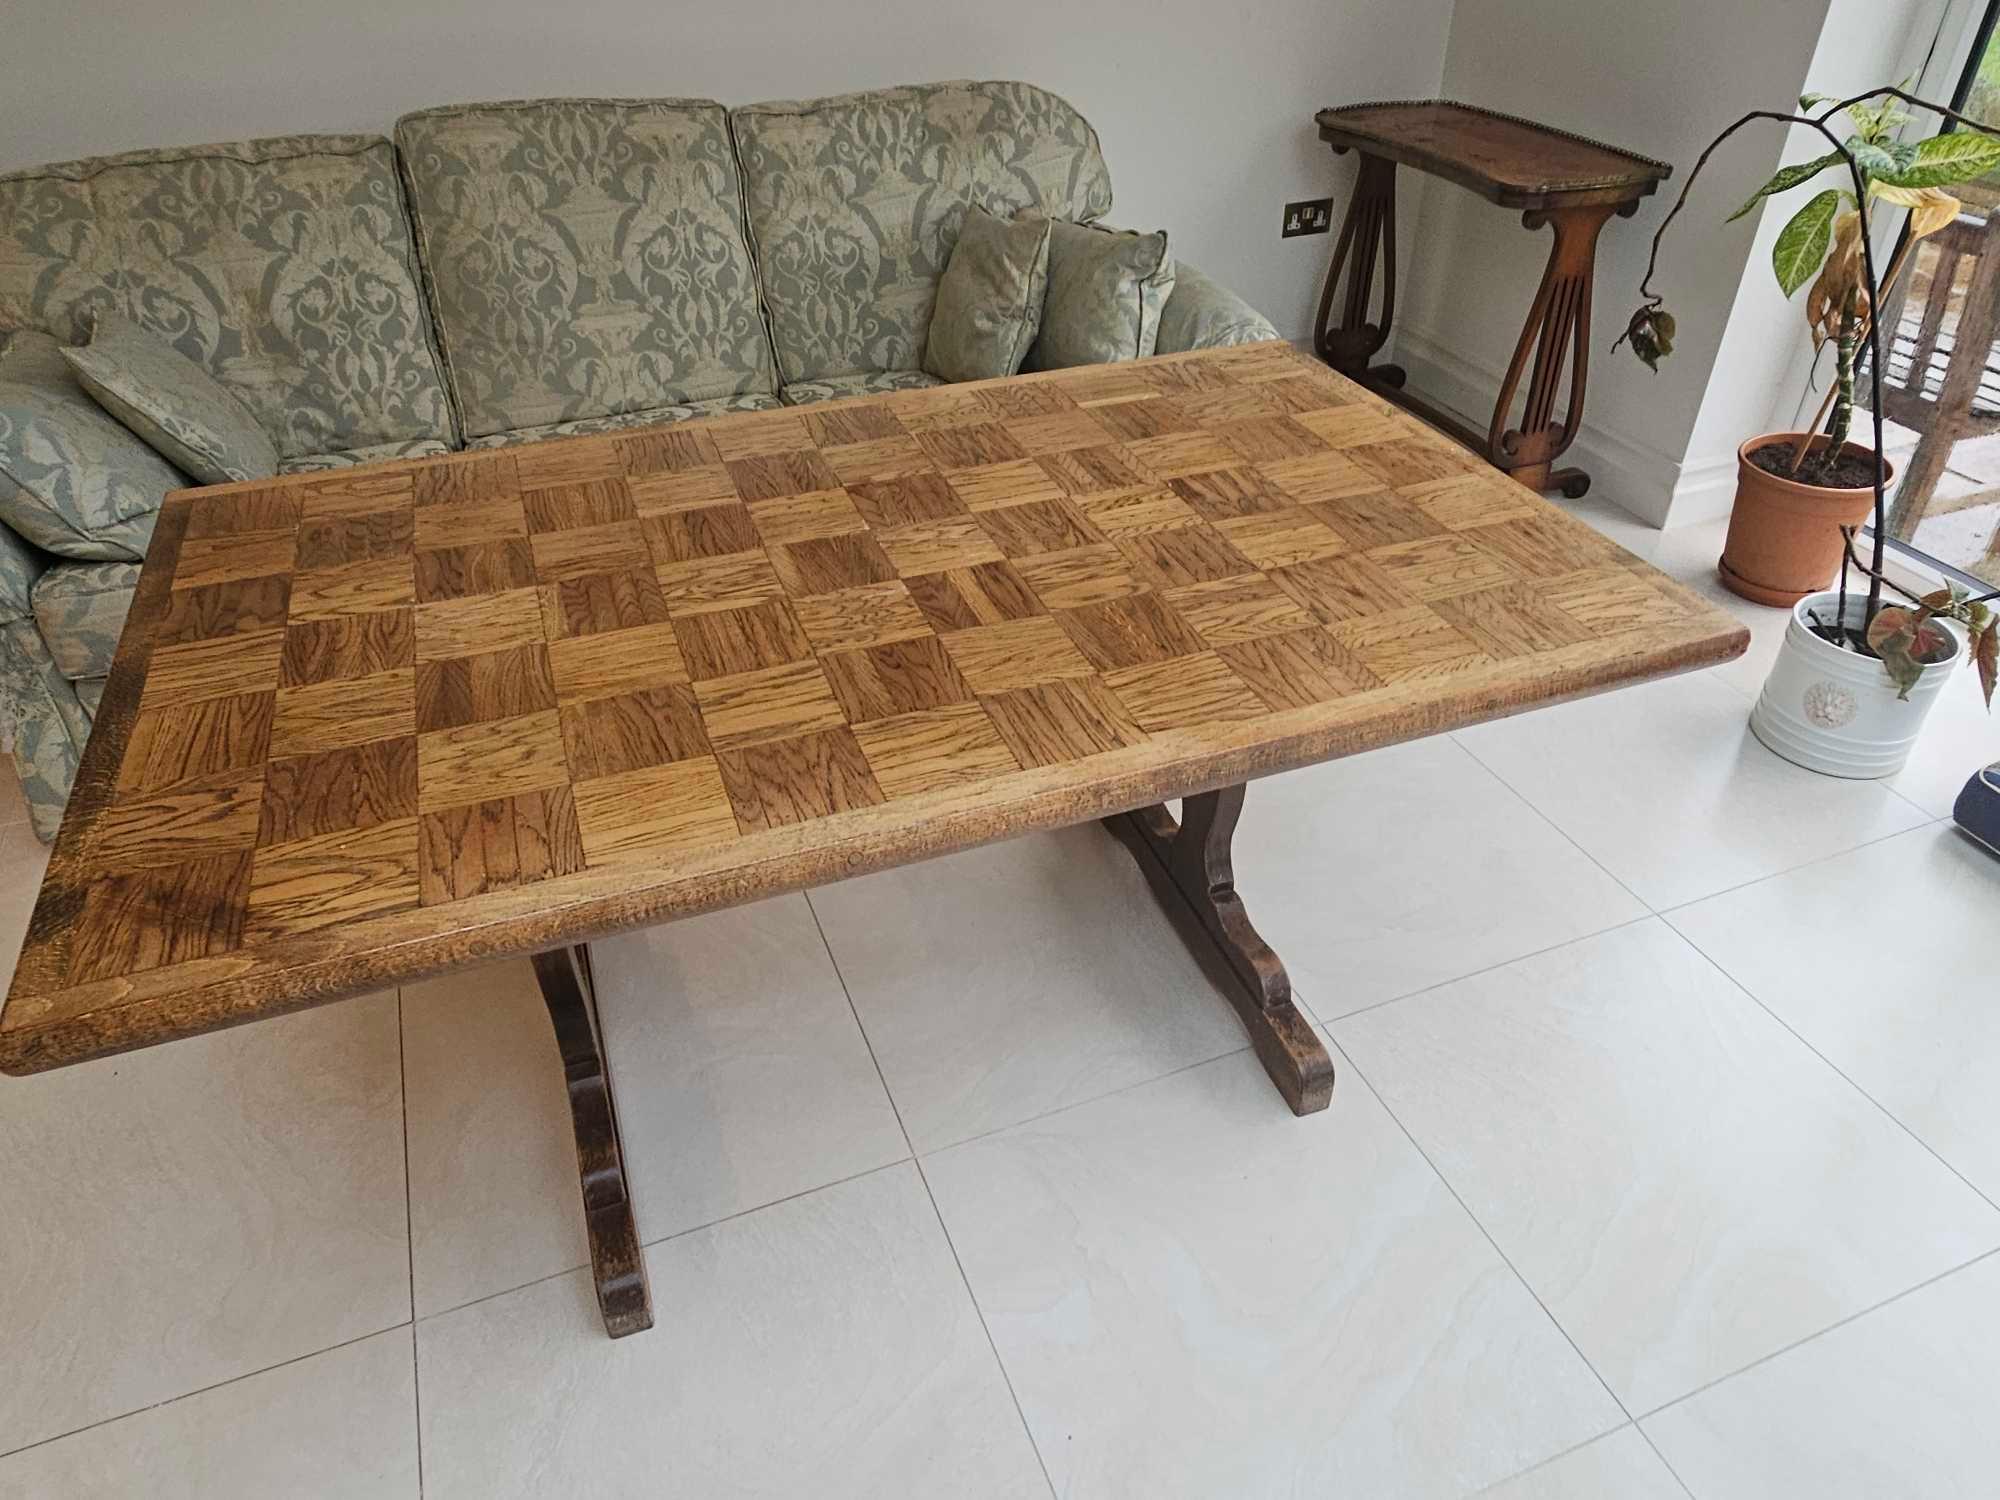 An Oak Trestle Dining Table With Parquetry Lattice Top 150 X 92 X 74cm - Image 2 of 5